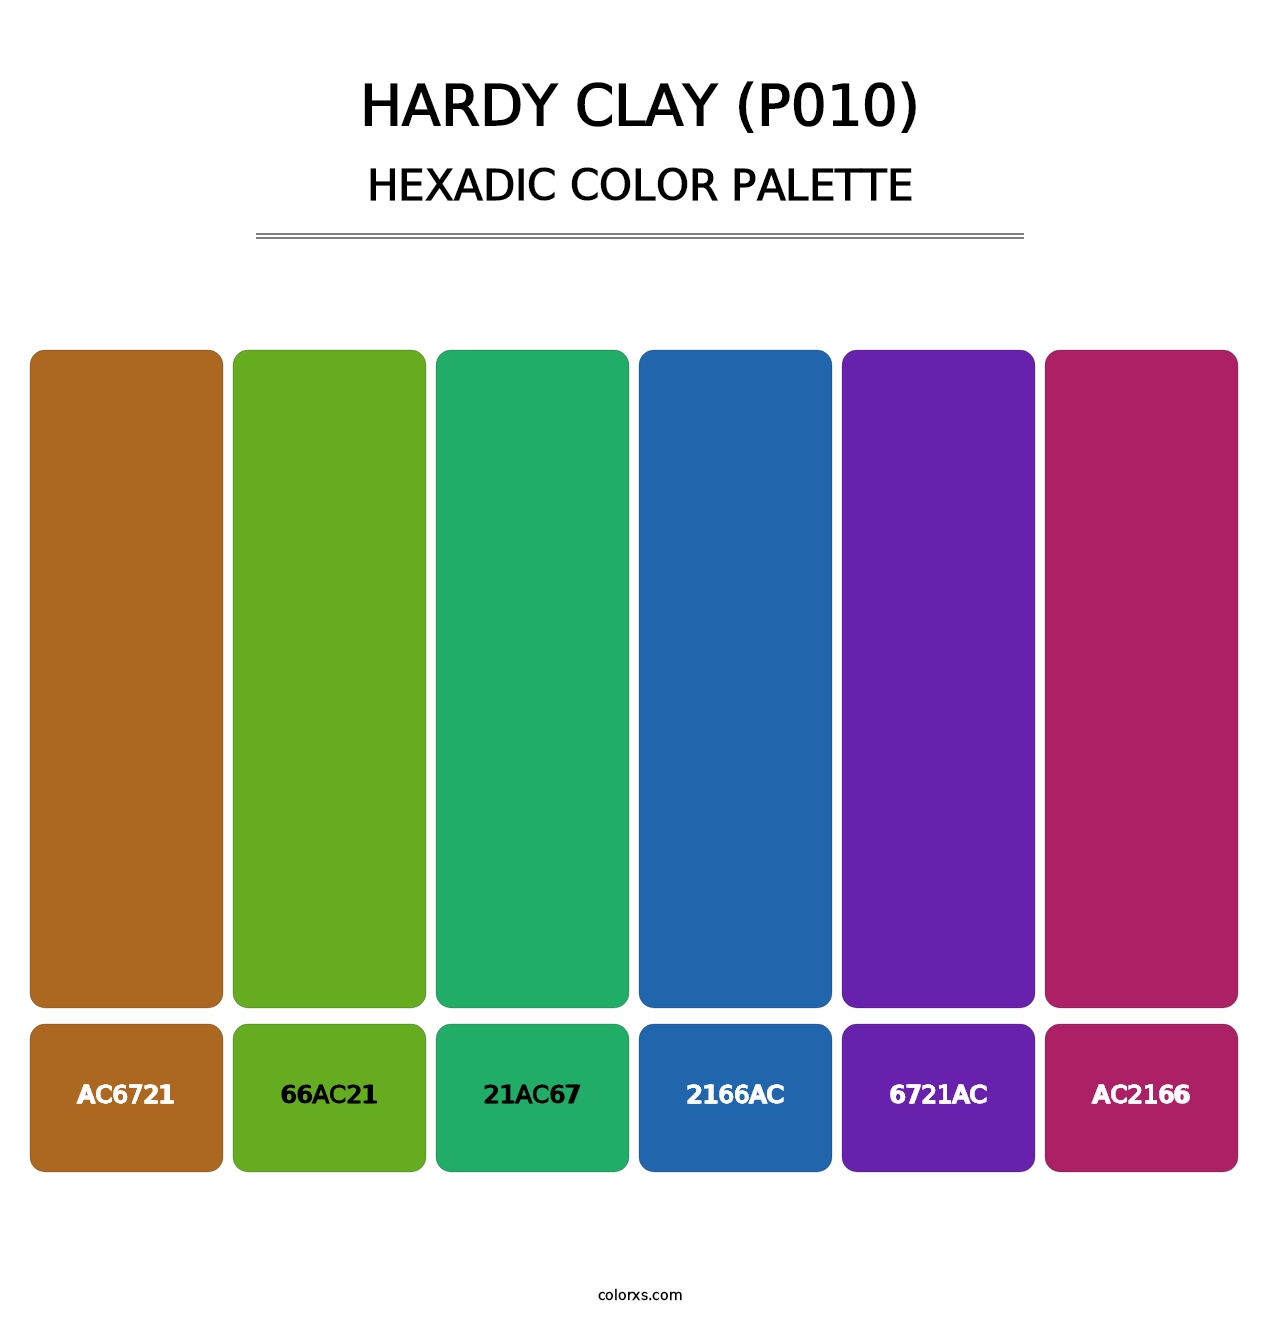 Hardy Clay (P010) - Hexadic Color Palette